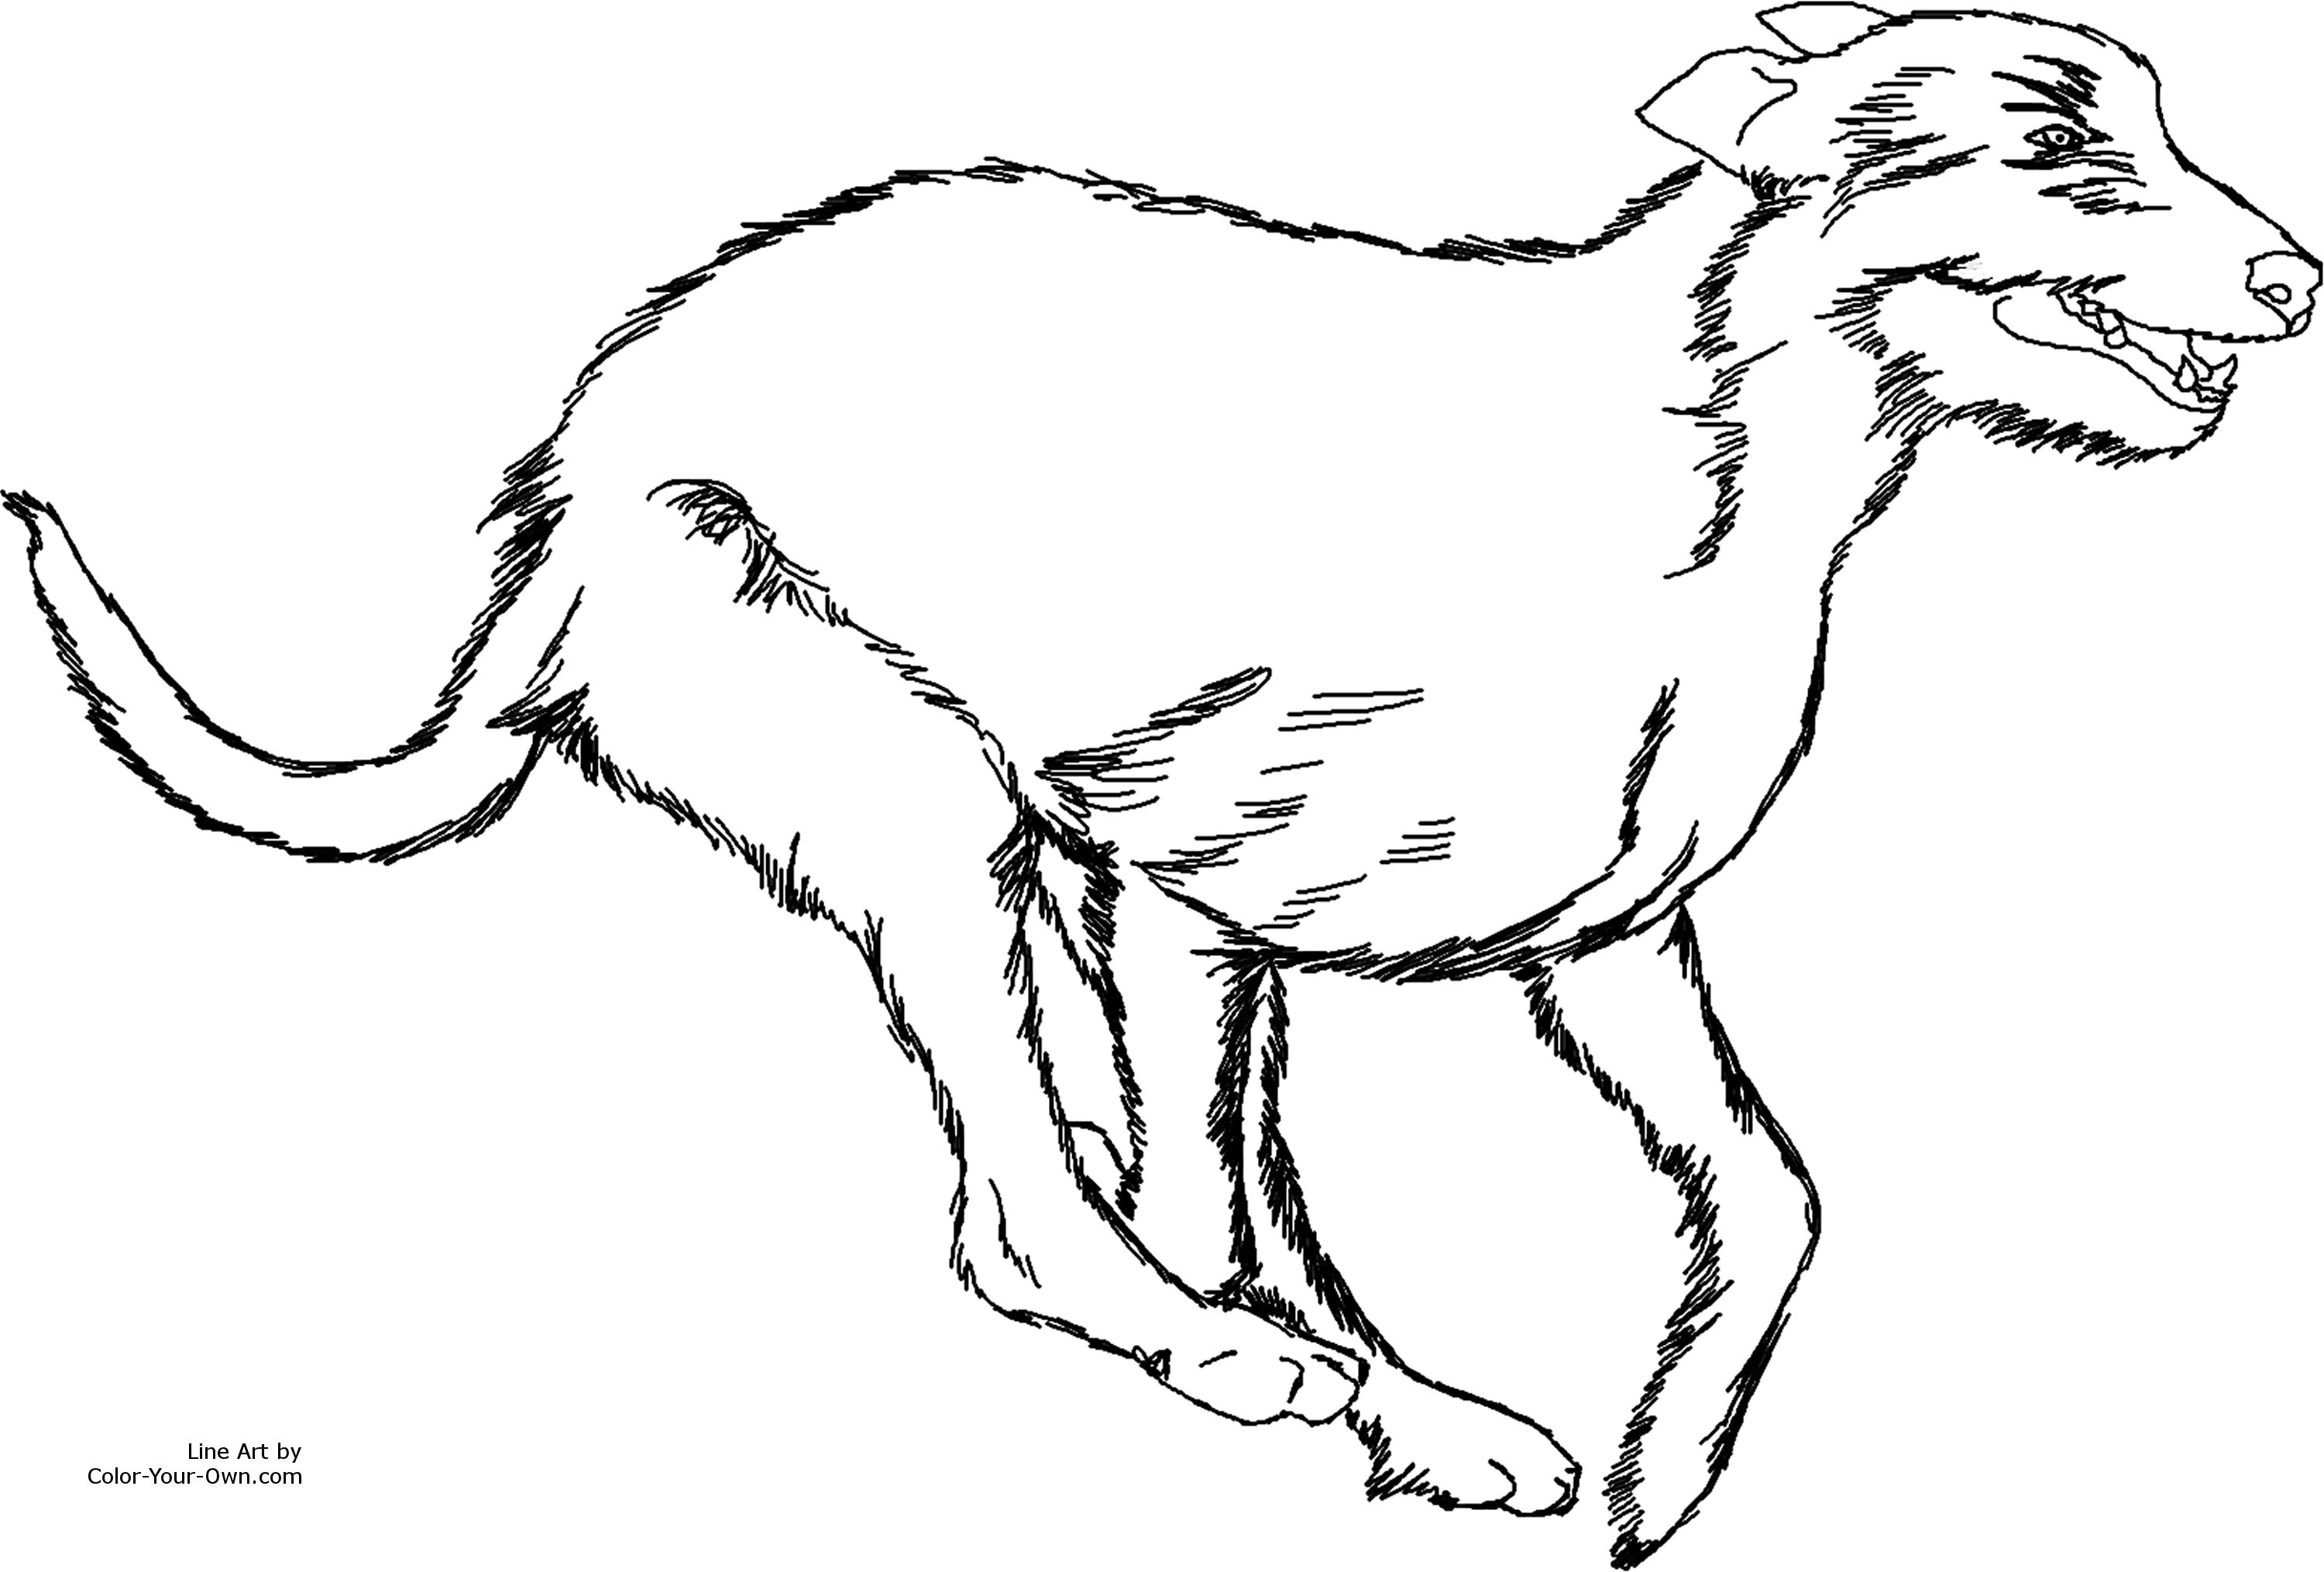 New Coloring Page - Irish Wolfhound Dog Coloring pages | Coloring ...